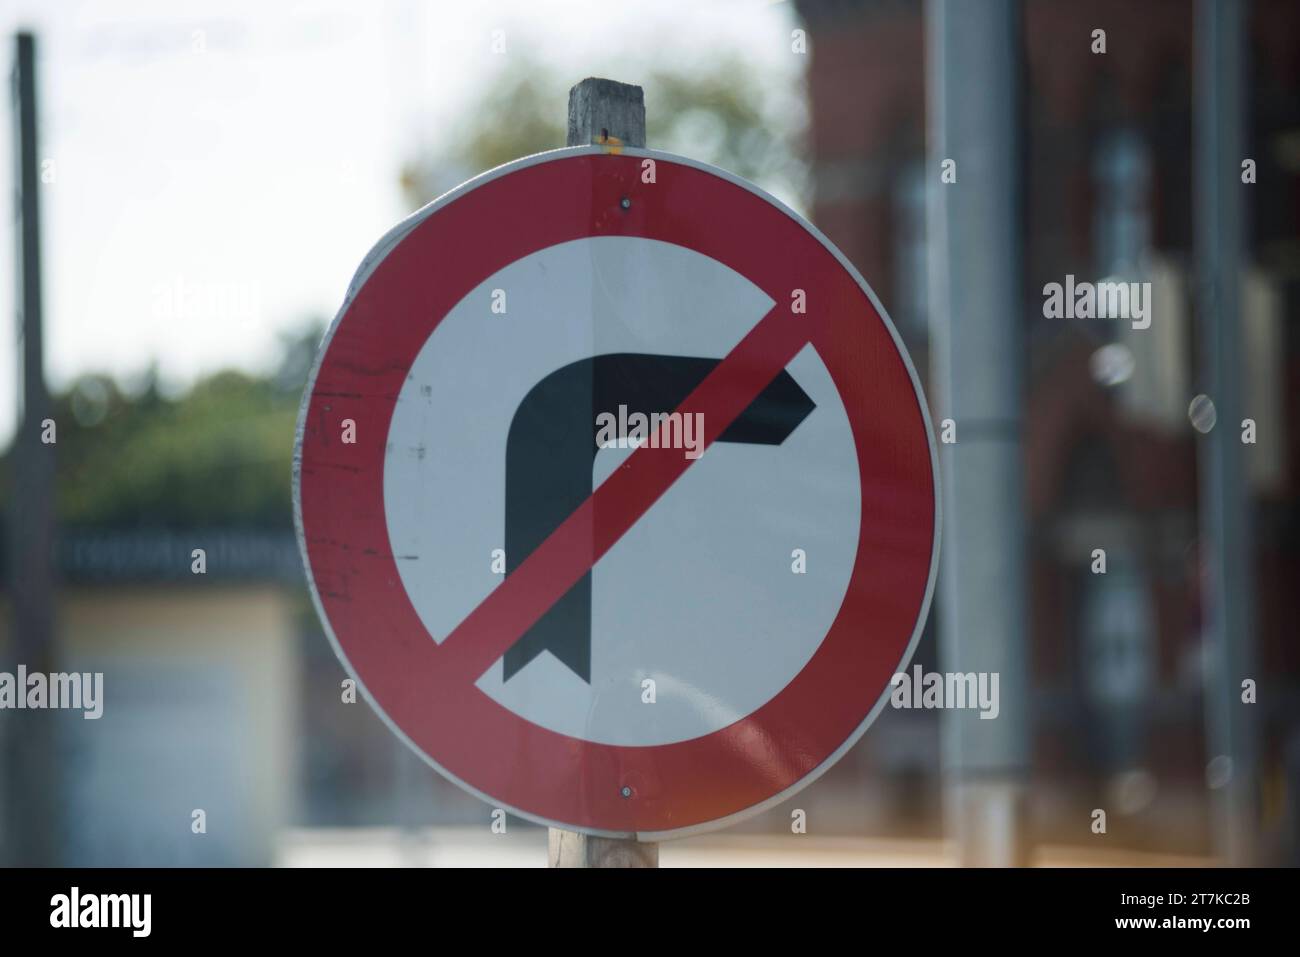 A Turn Prohibition Or No Turn Traffic Sign On The Road A Turn Prohibition Traffic Sign Credit: Imago/Alamy Live News Stock Photo